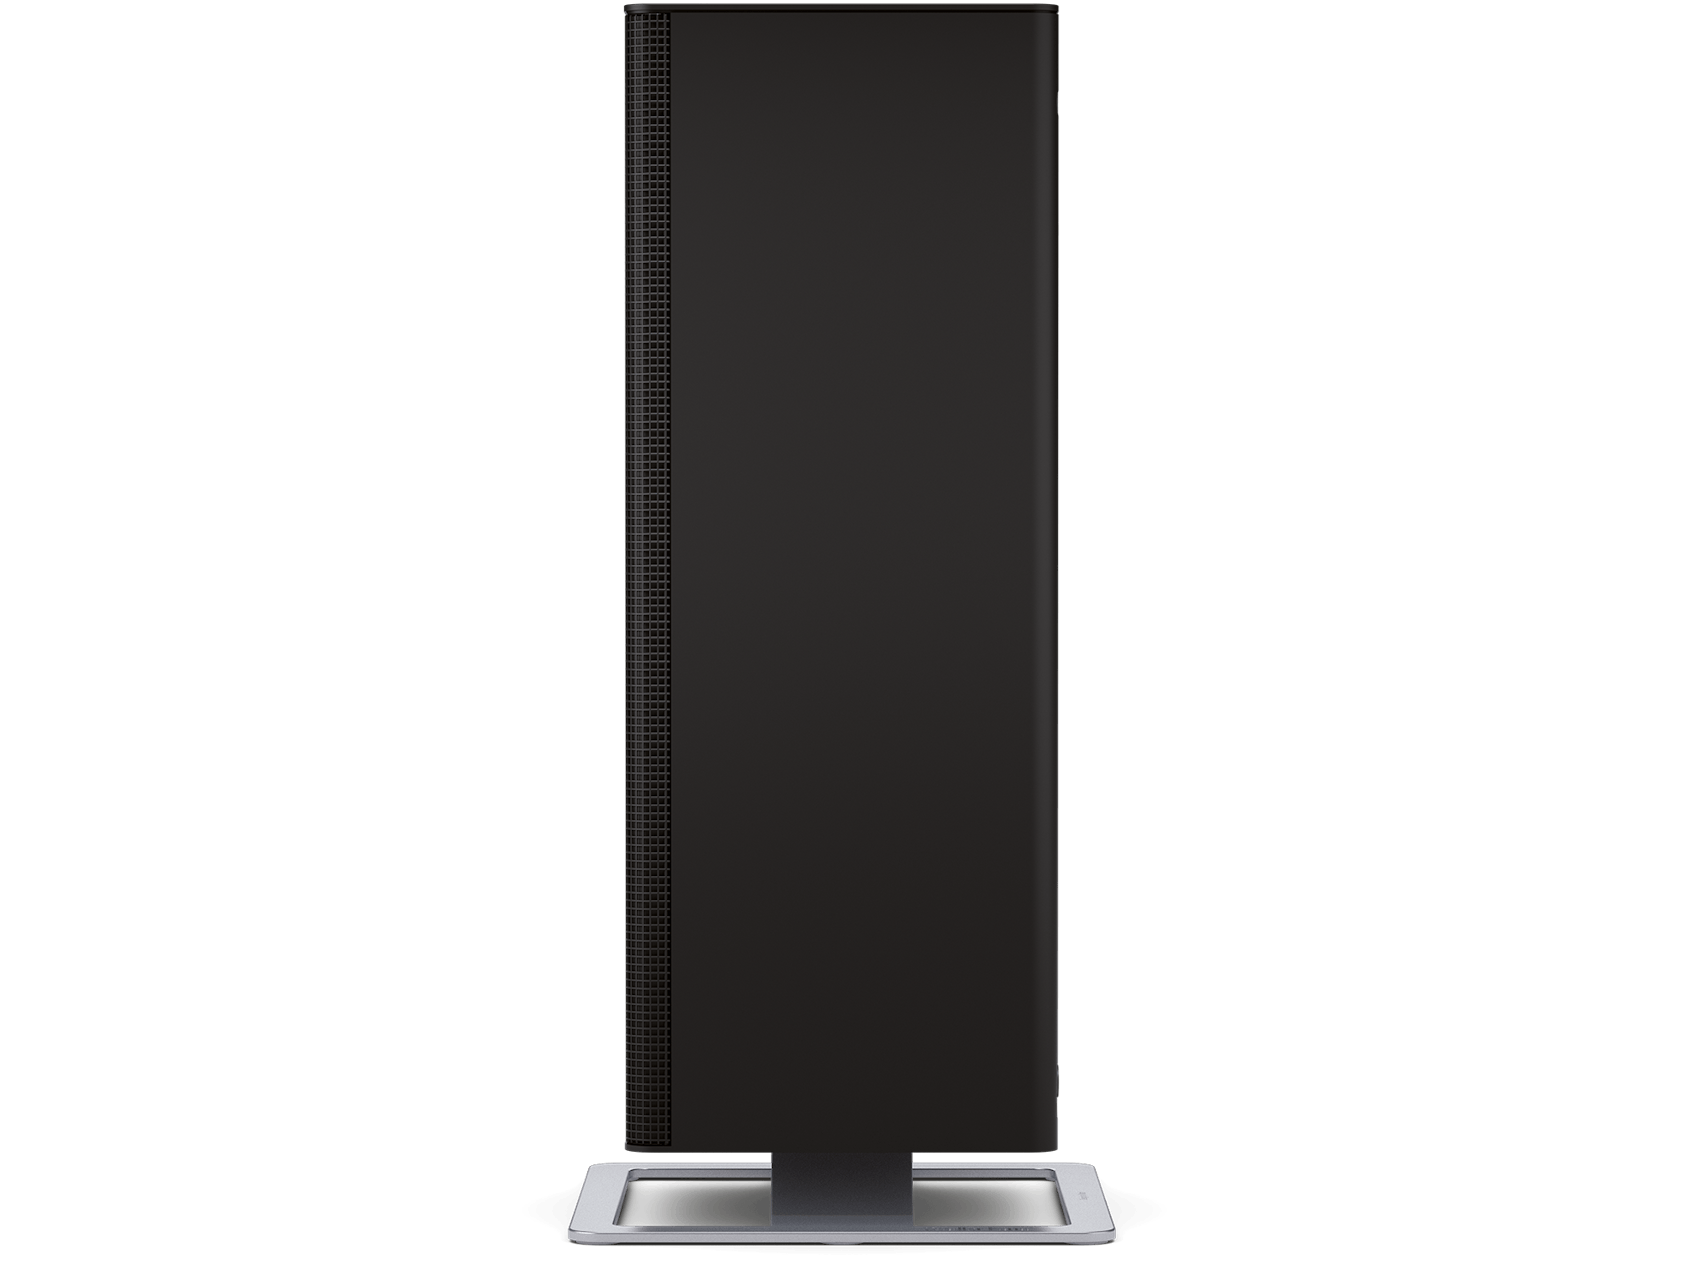 Anna big heater by Stadler Form in black as front view